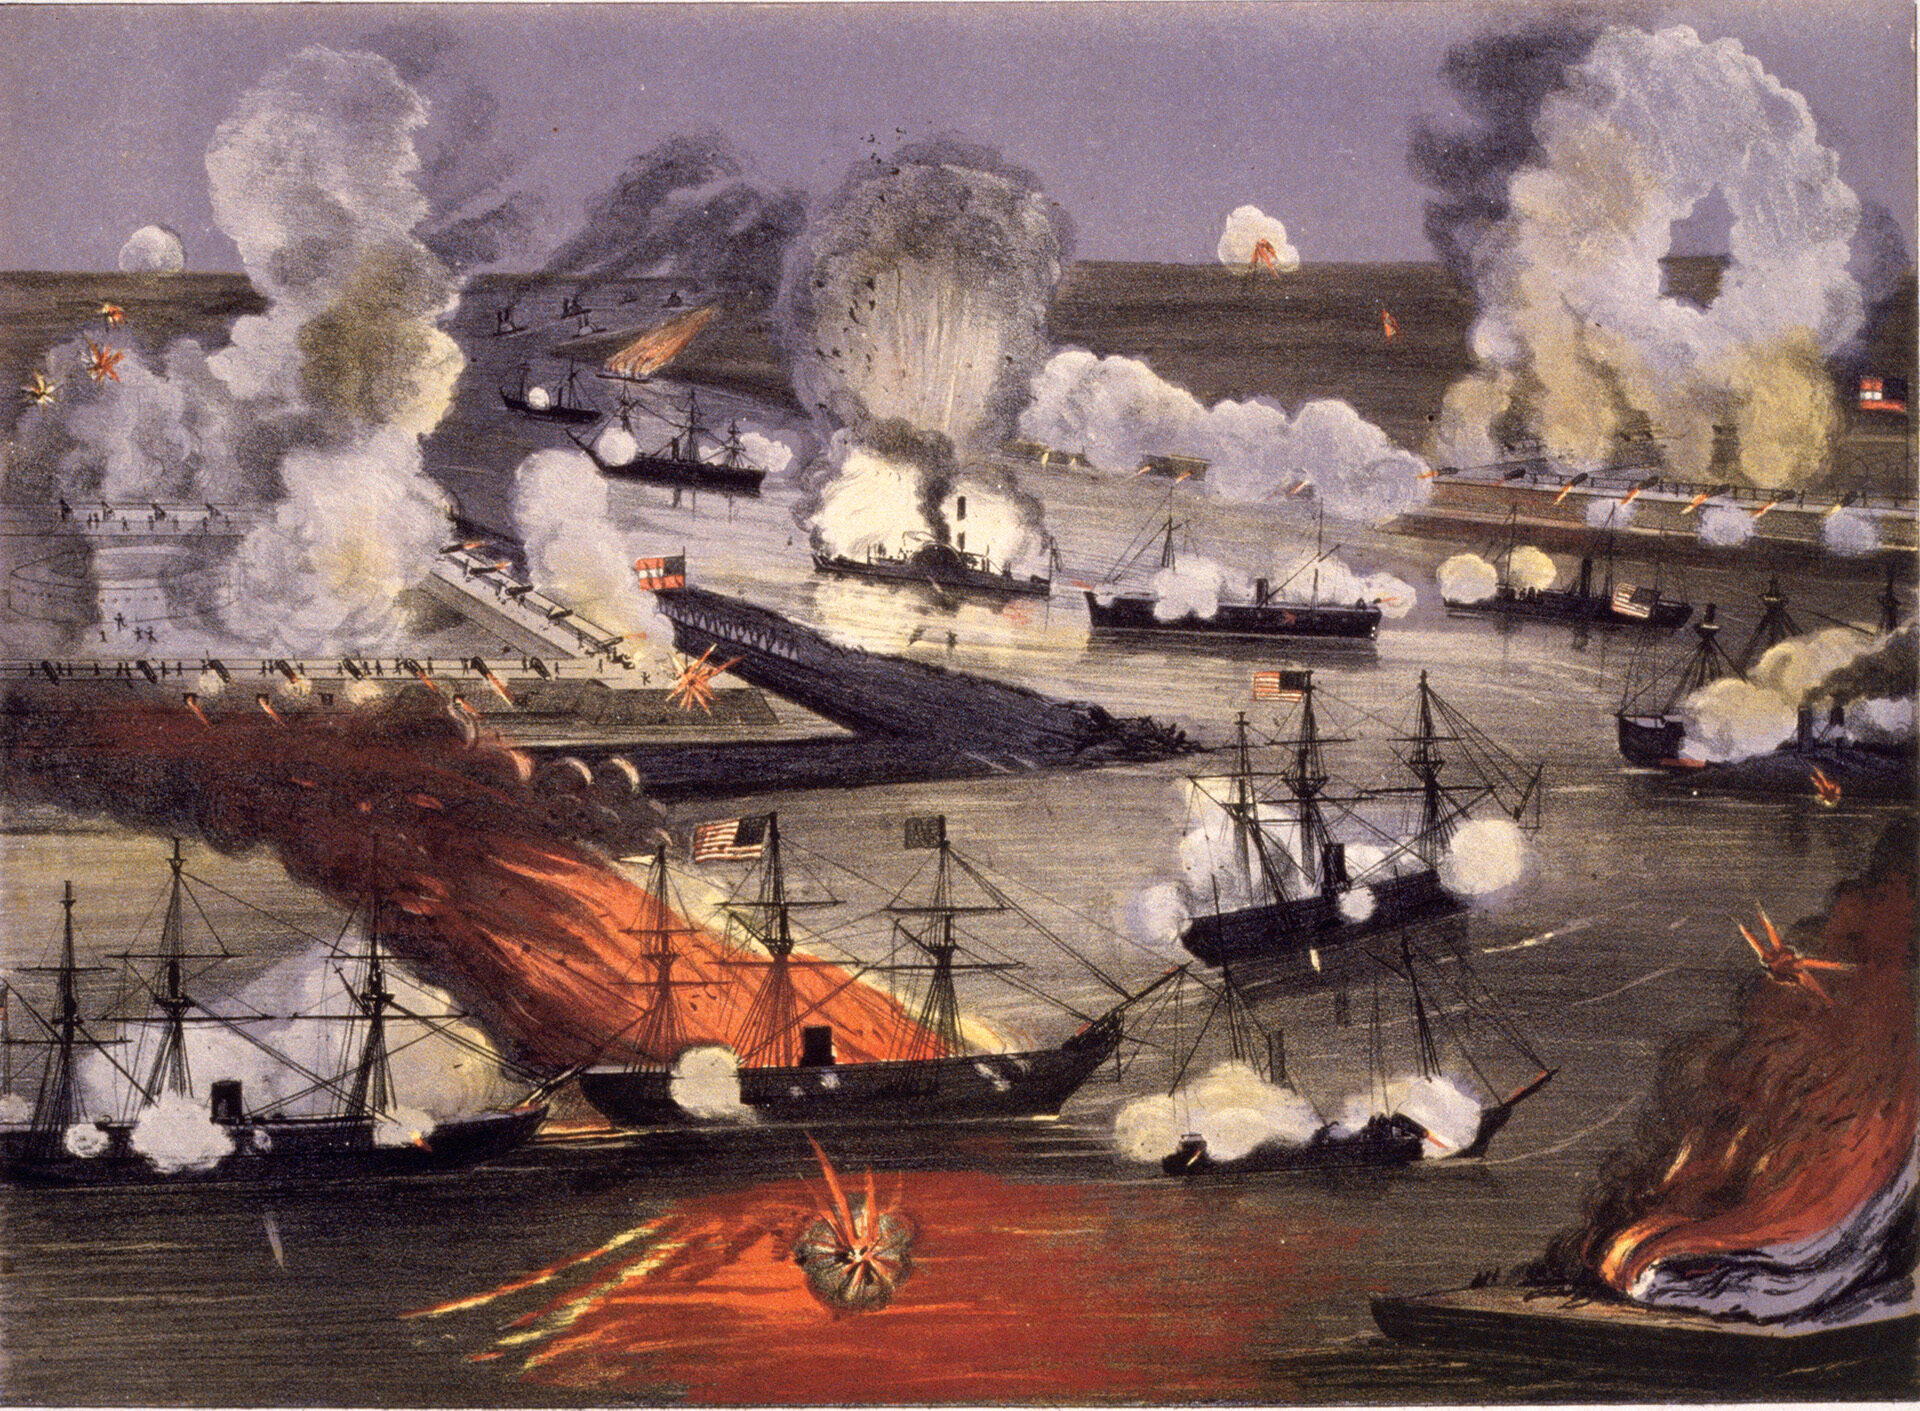 For the run upriver past the two forts, Farragut divided his fleet into three divisions. Two divisions took on Fort Jackson (left), and one division engaged Fort St. Philip.